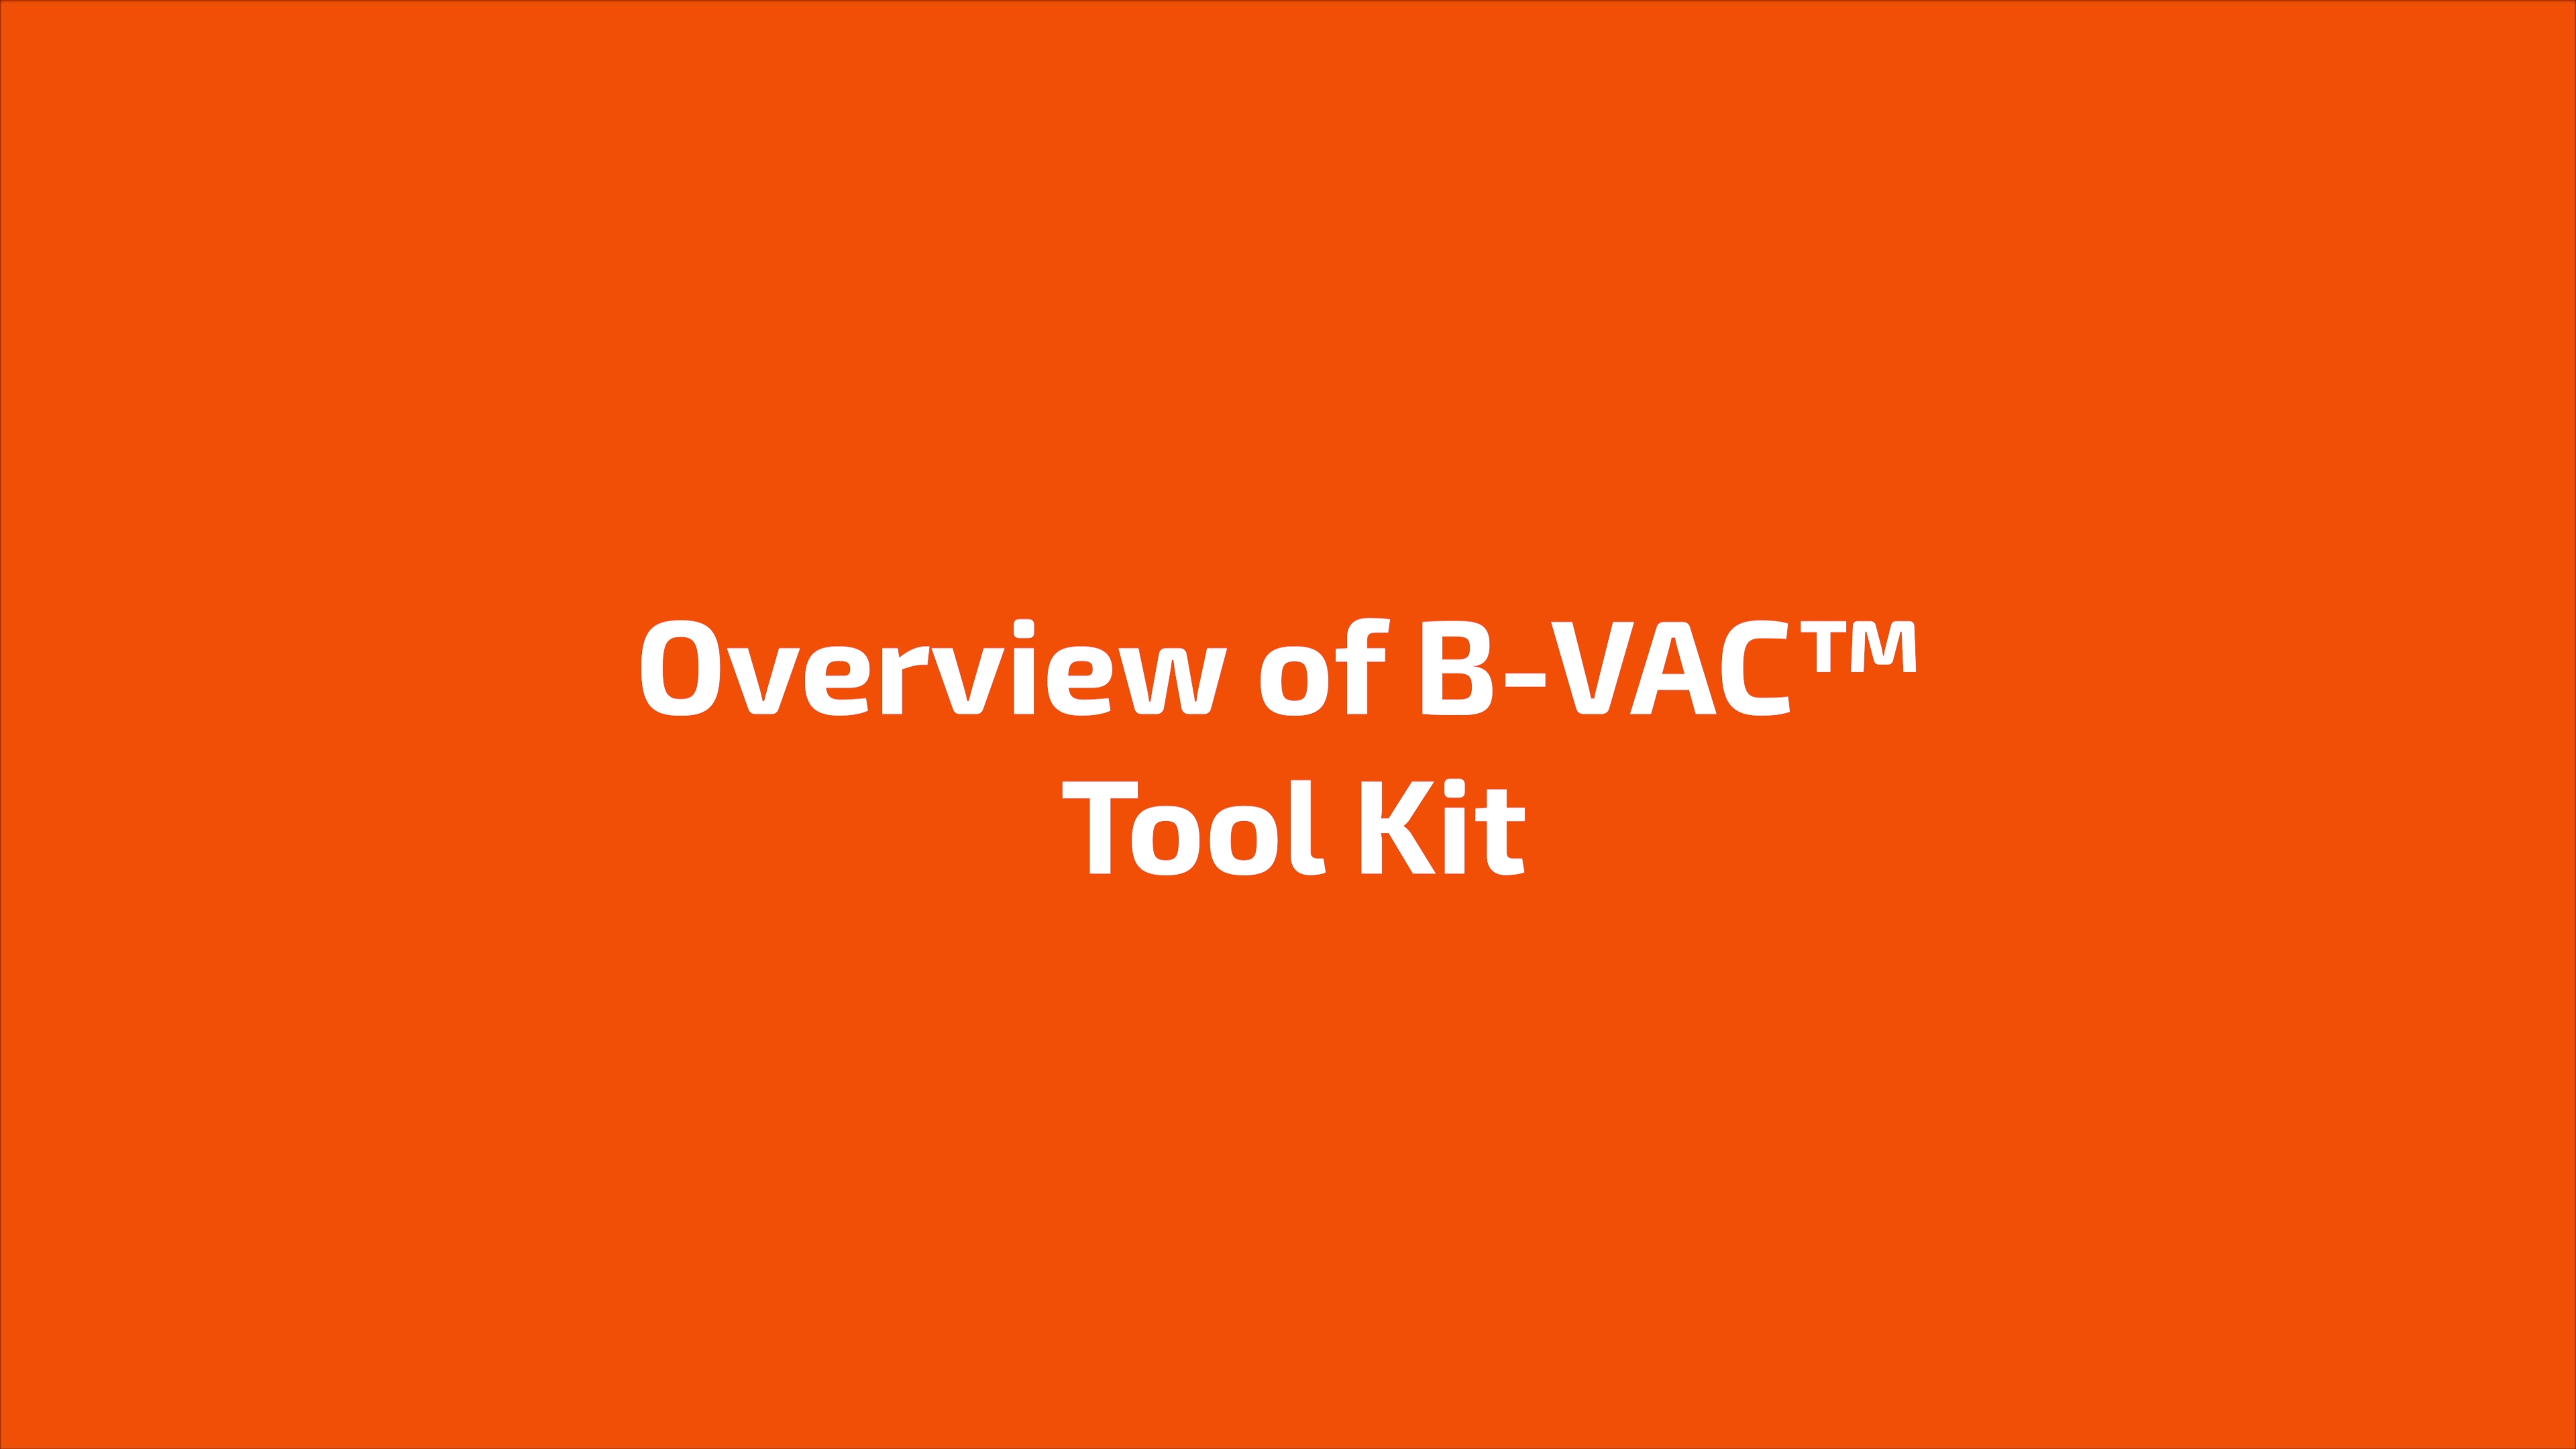 Overview of BVAC Toolkit